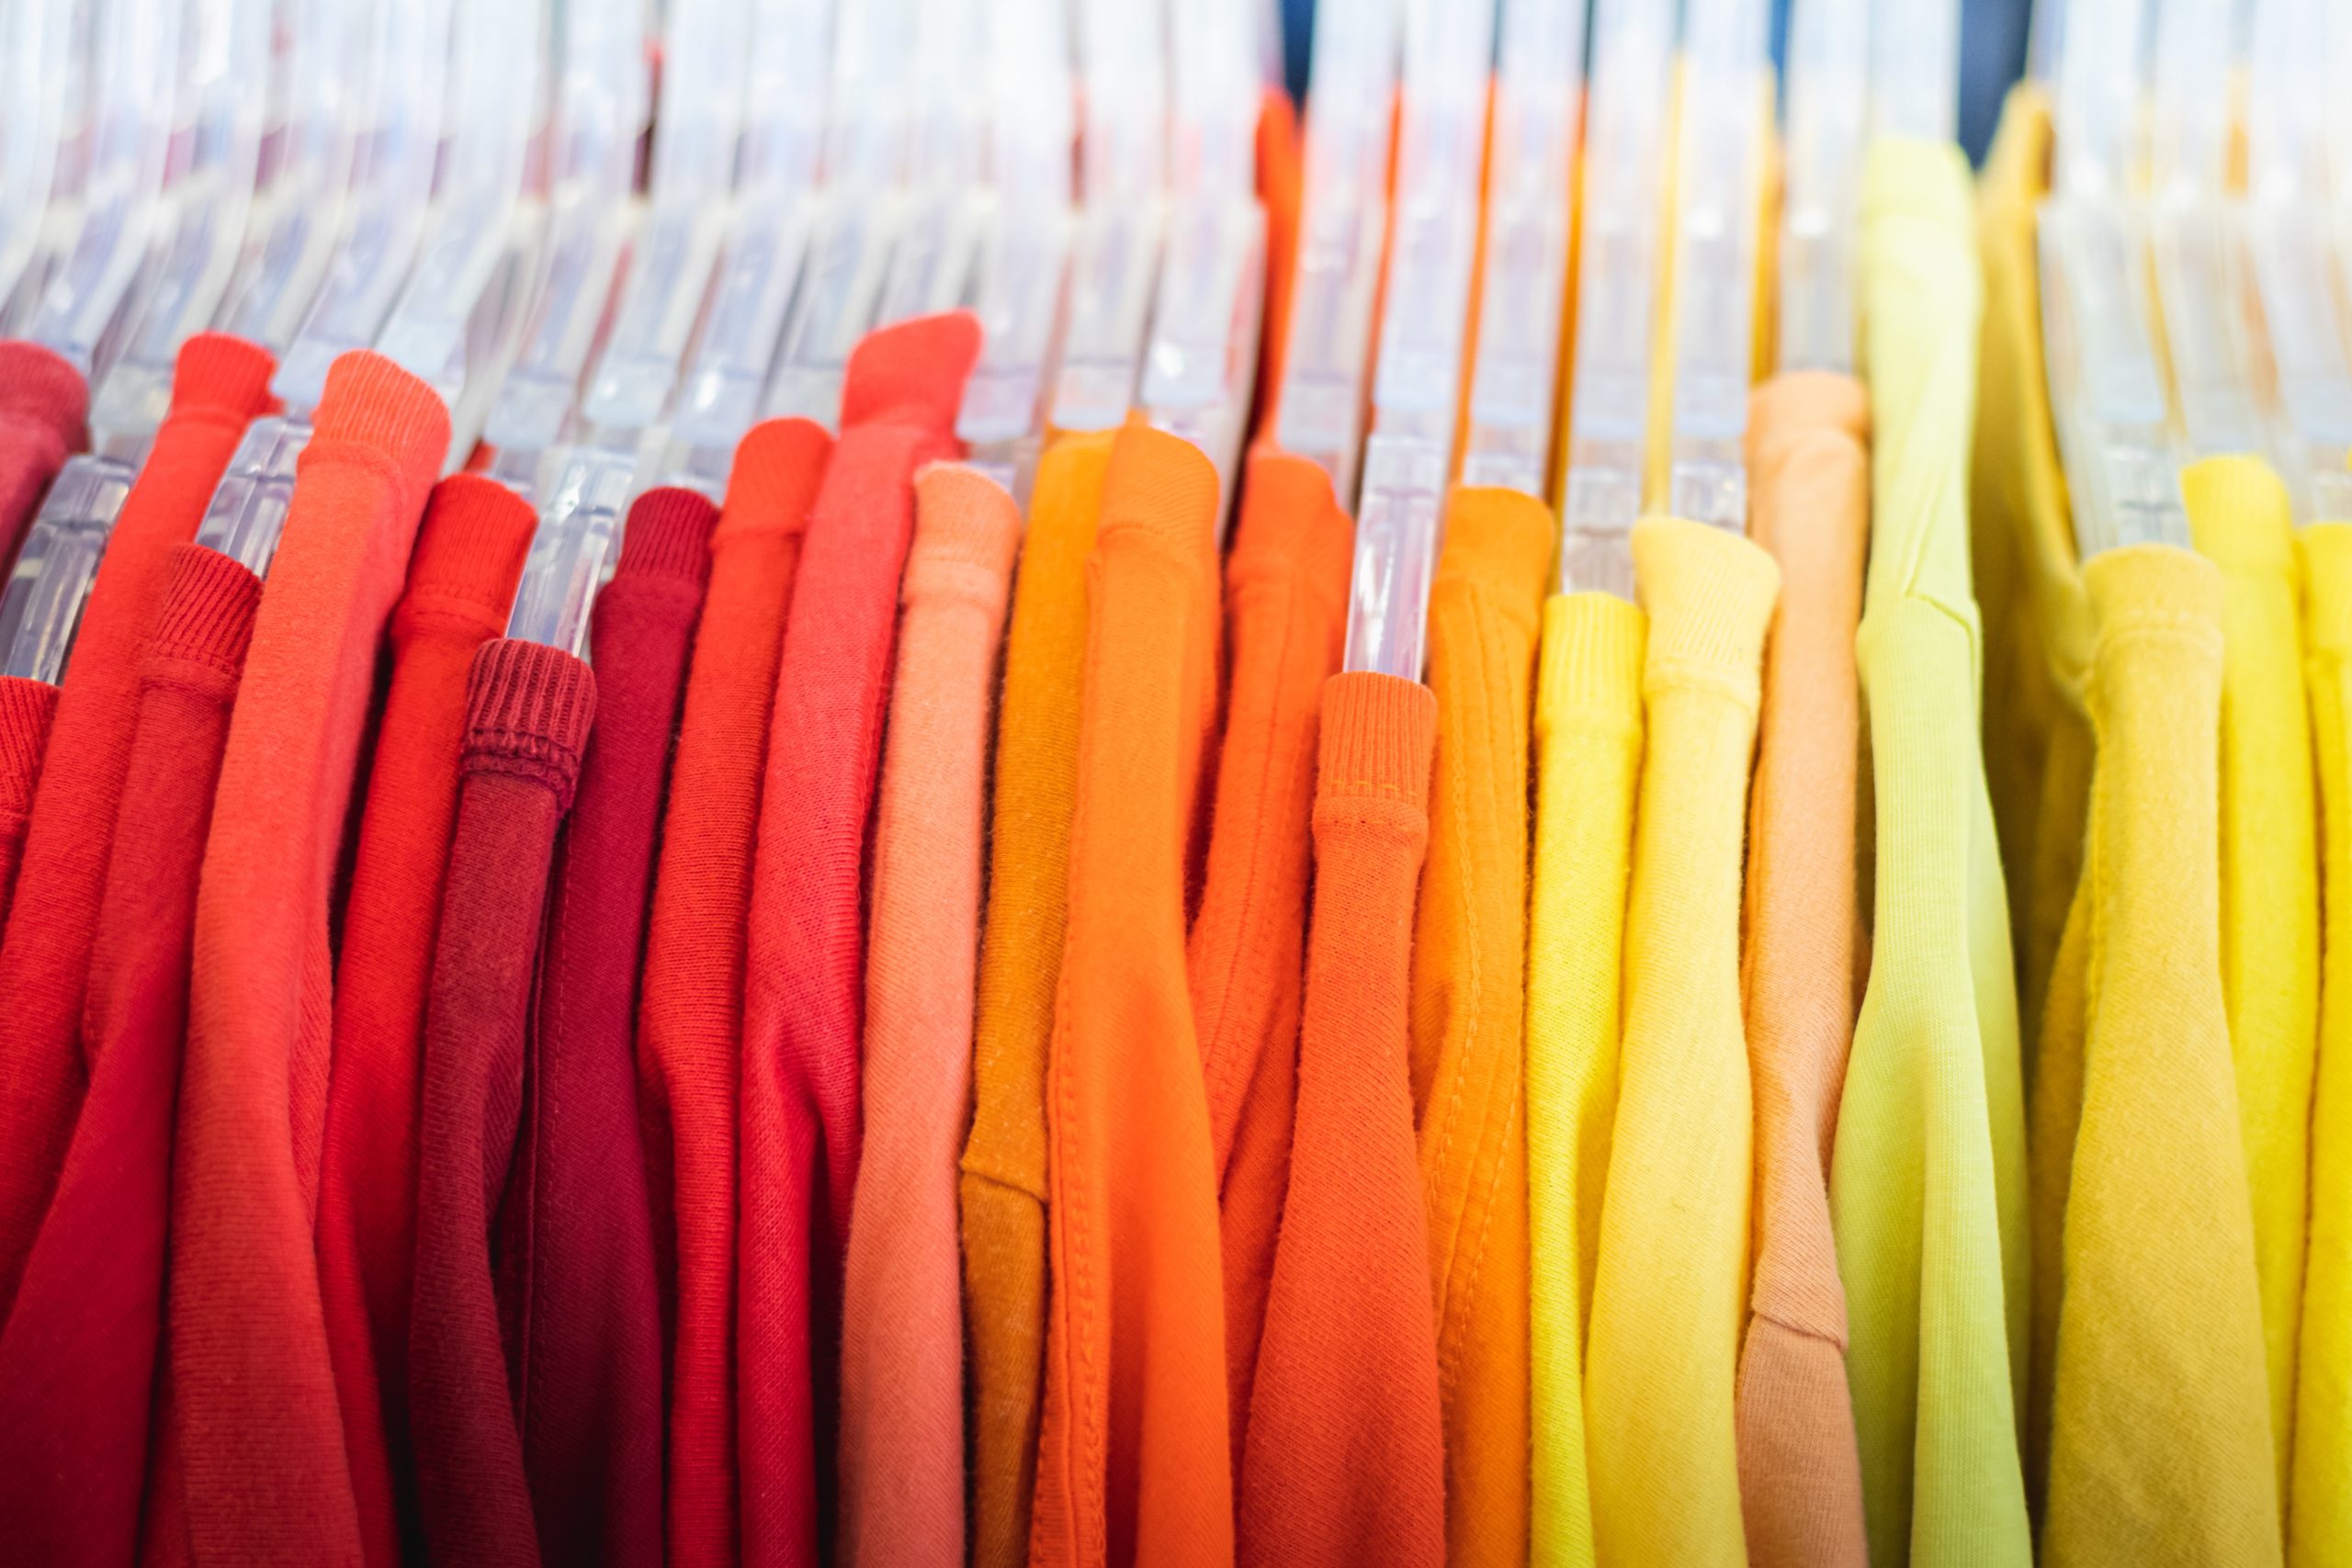 Brightly coloured sweaters hanging on a rack in order of red on the left, orange in the middle, and yellow on the right